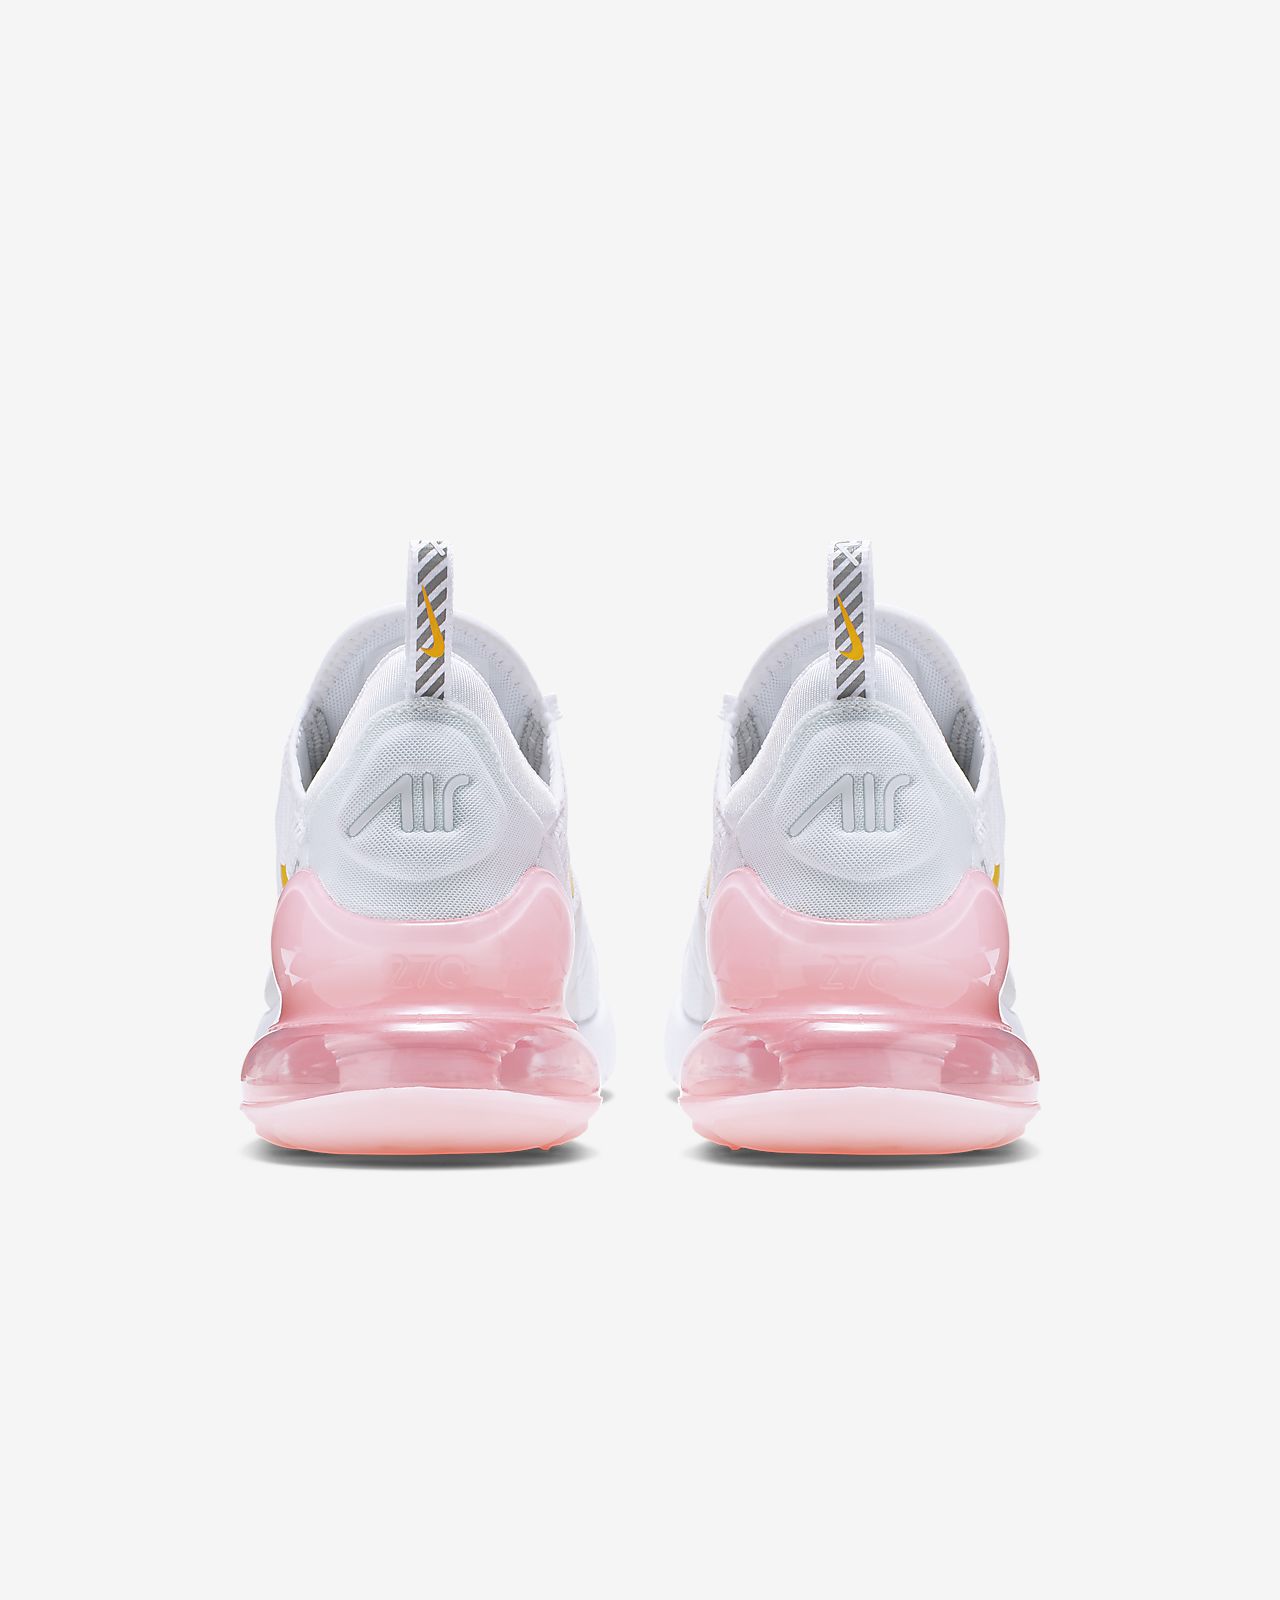 air max 270 white and light pink